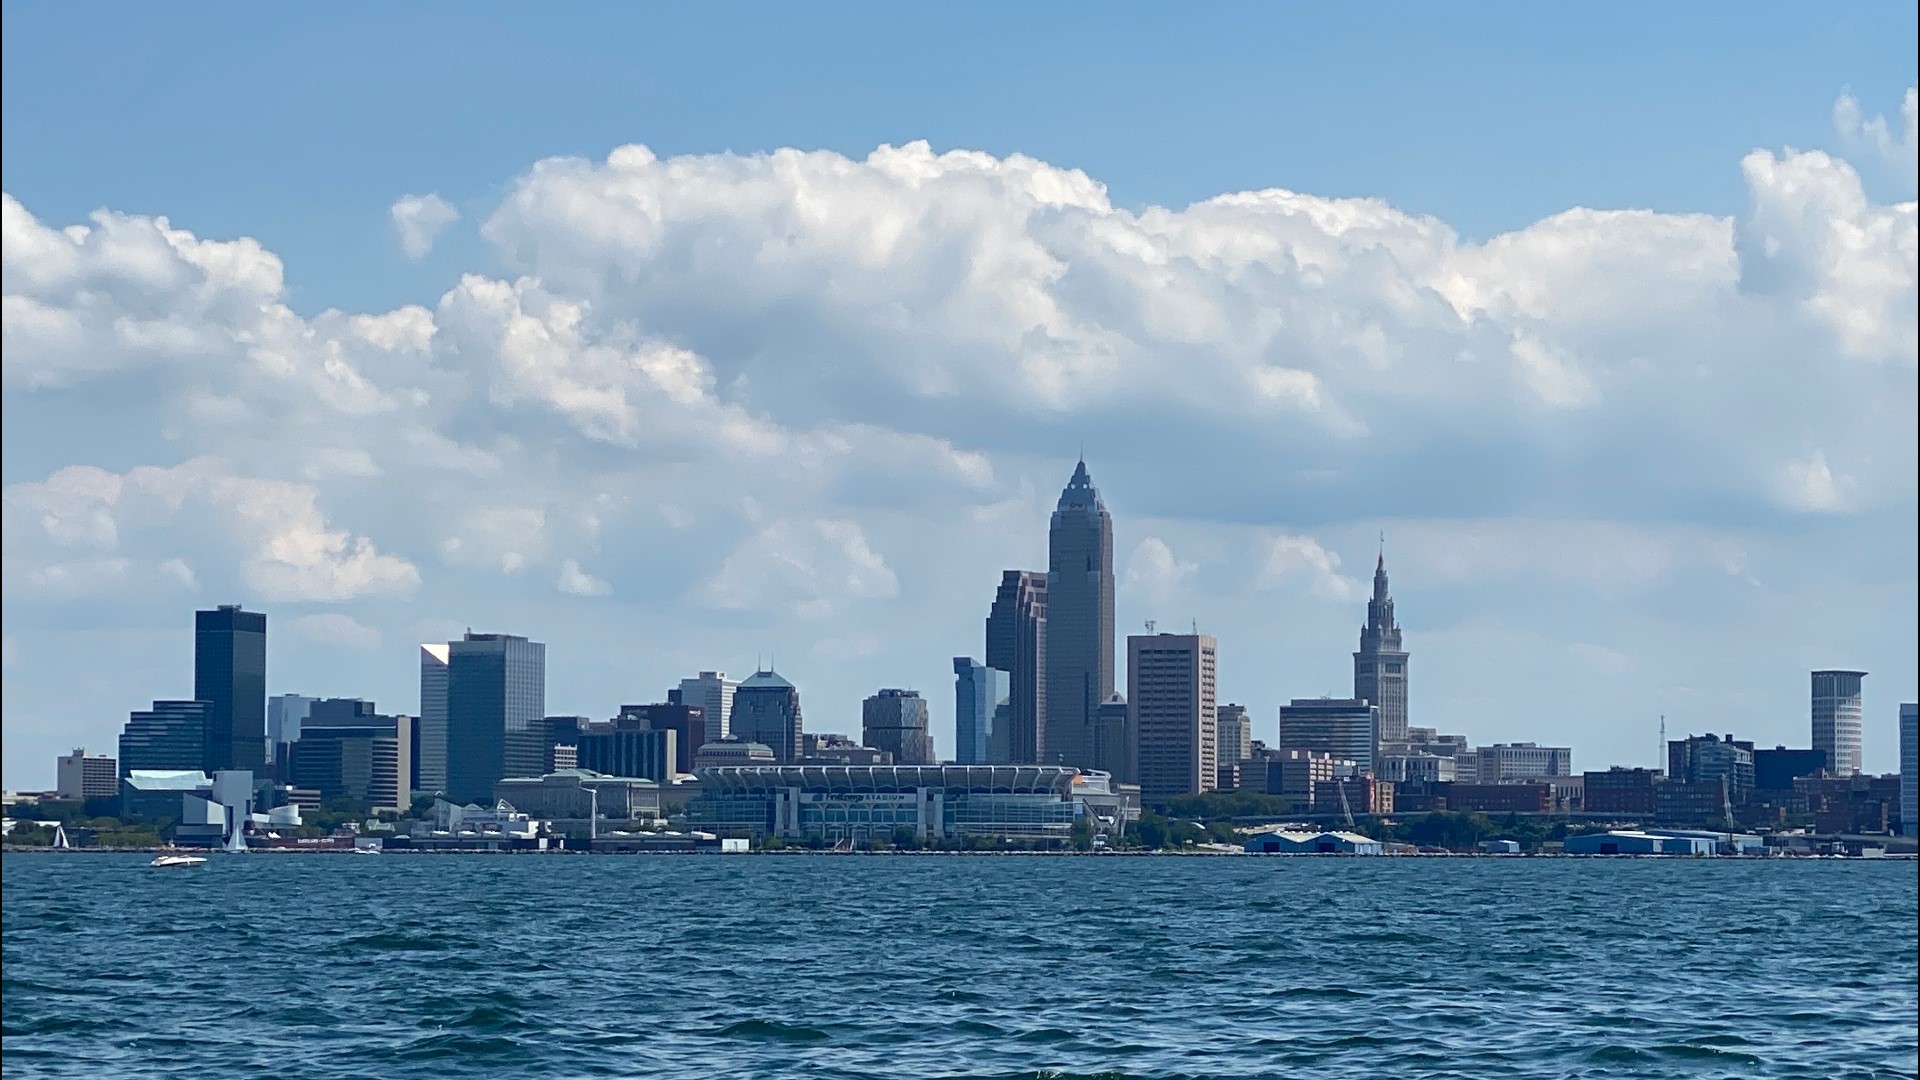 Only about half of Clevelanders are accounted for so far in the census. There's a push to get every person counted, so Cleveland can receive vital funding.